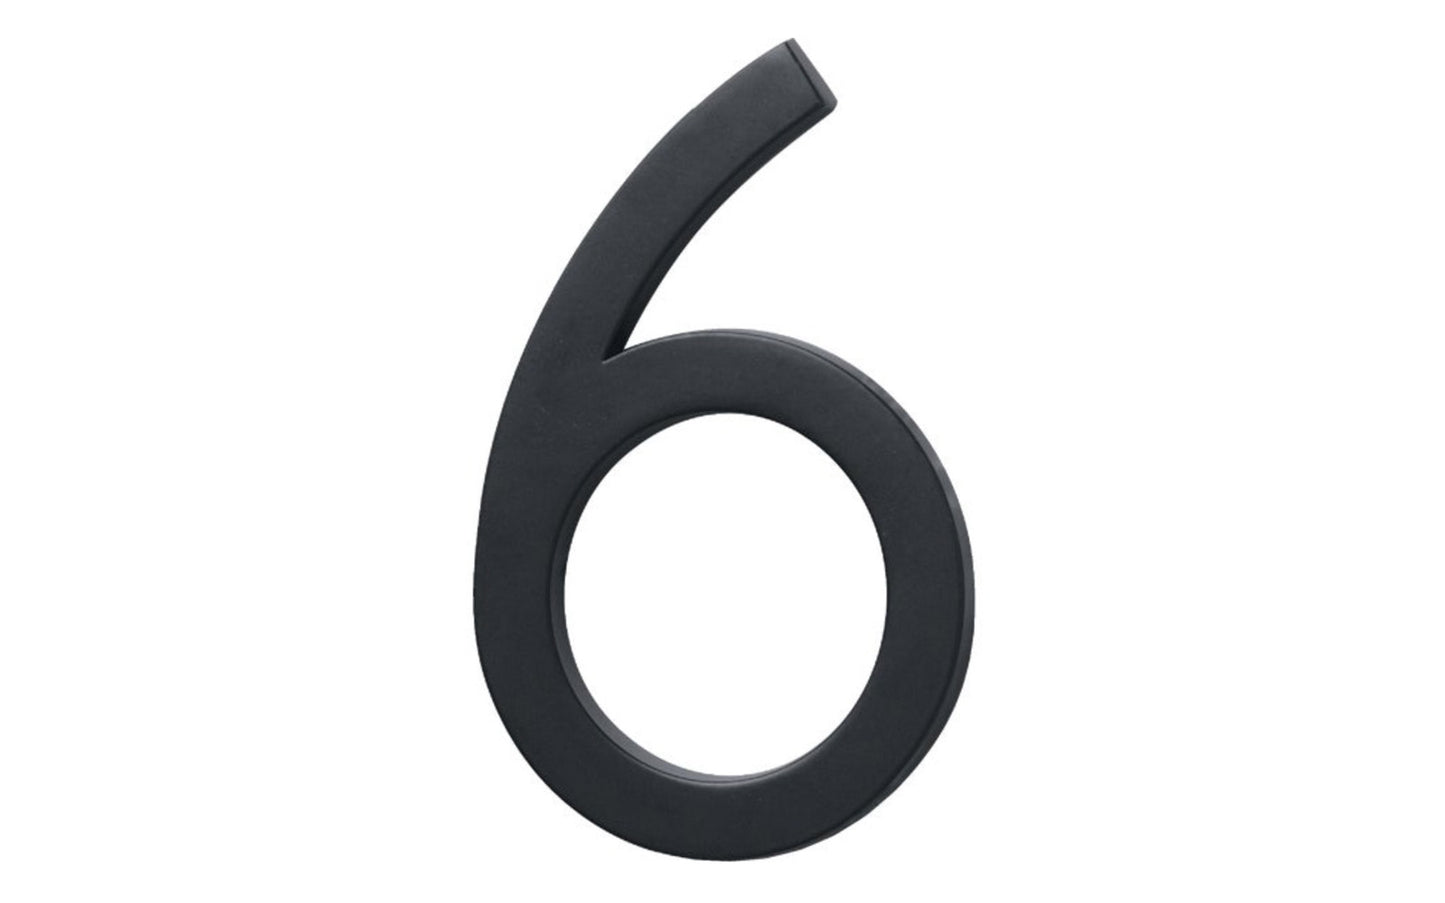 Number Six House Number in a classy architectural style design. Satin black finish. 6" size house number with 1/2" material thickness. Can be installed flush mount or floating mount (elevated from wall for a shadow effect). #6 House Number. Hy-Ko Model No. FM-6/6. 029069310769